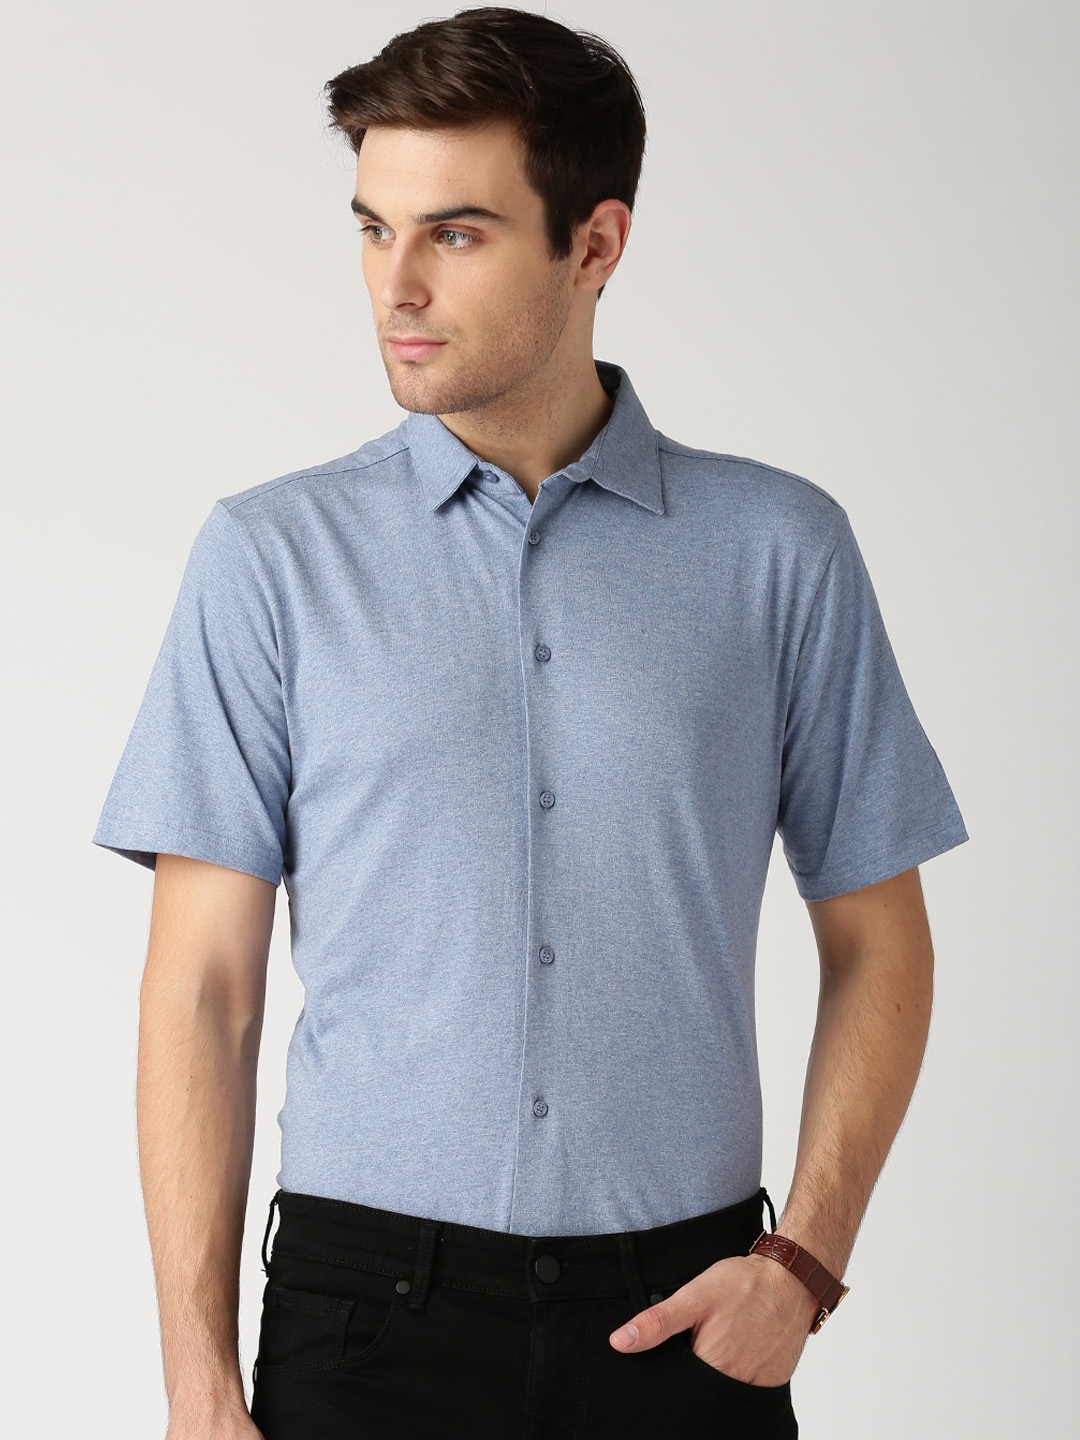 Buy ETHER Blue Knitted Shirt - Shirts for Men 1217404 | Myntra